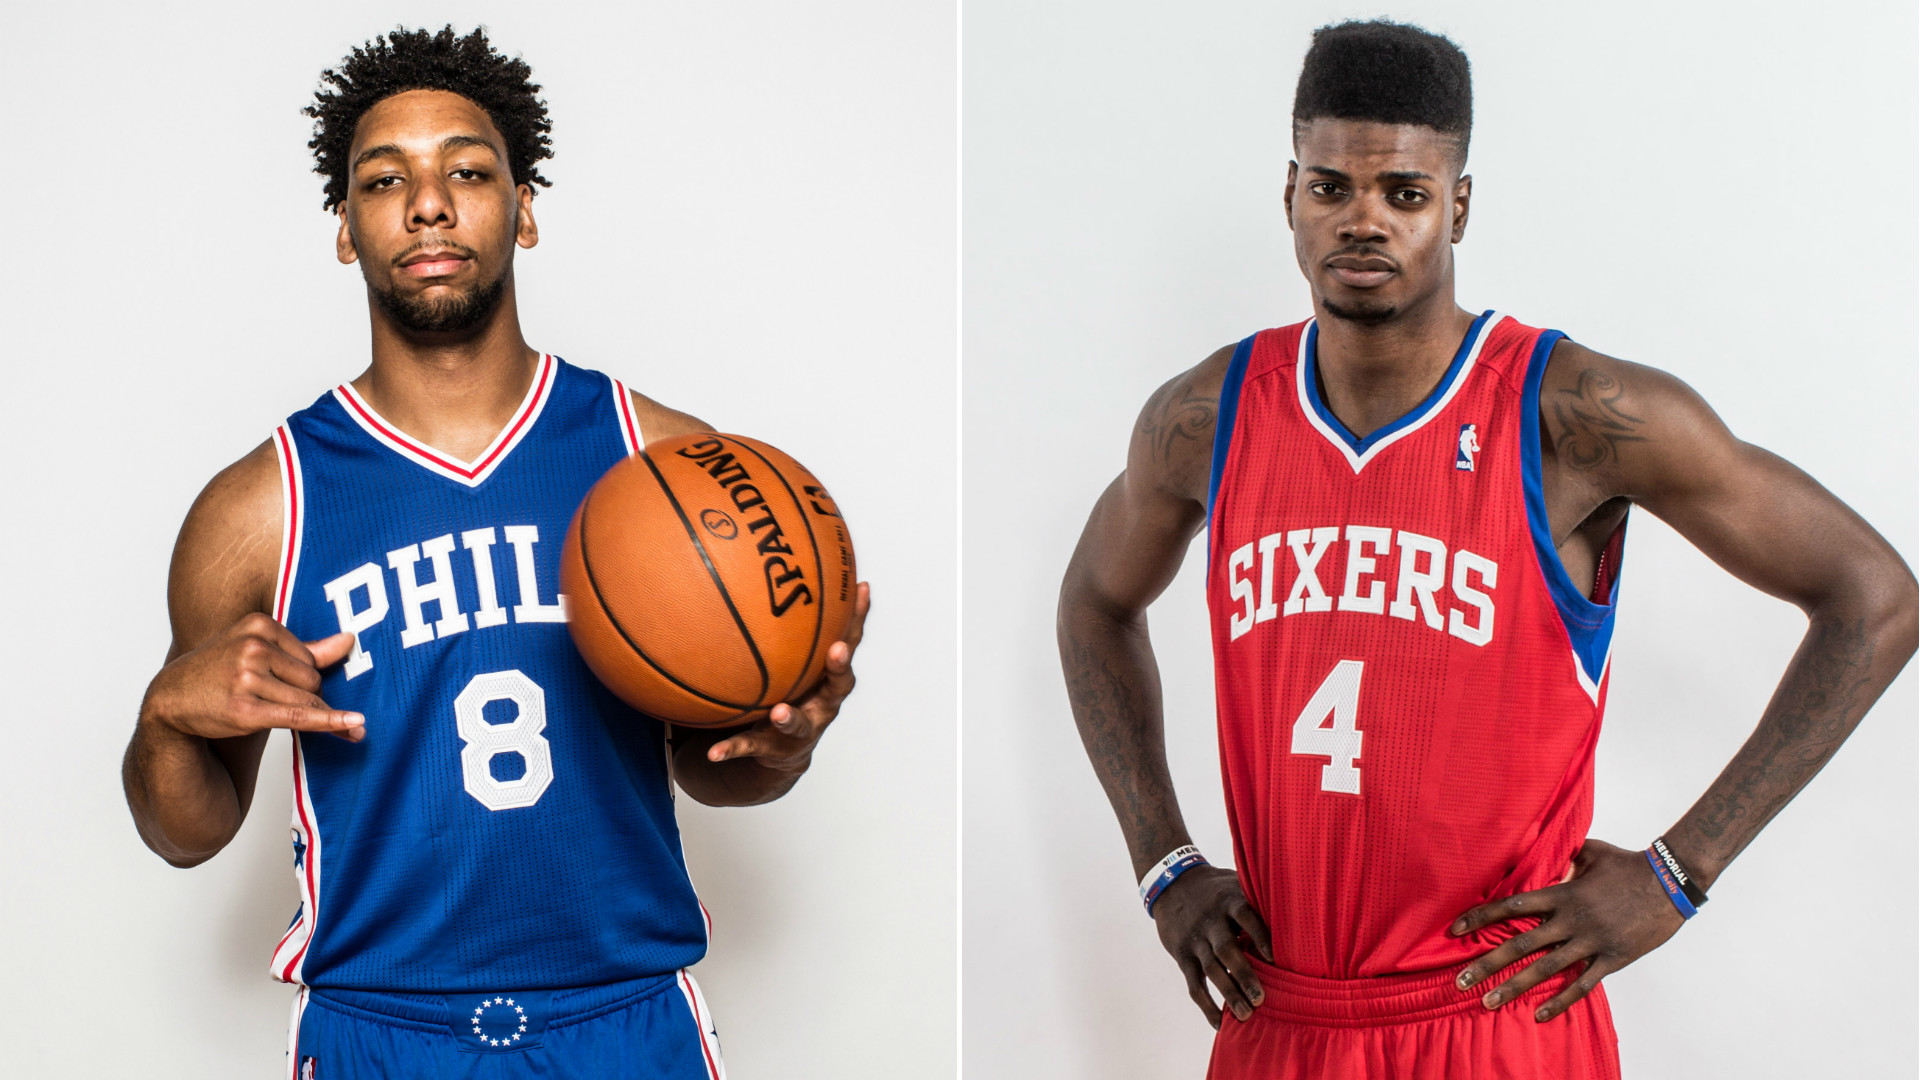 1920x1080 Jahlil Okafor and Nerlens Noel were built to play together | NBA | Sporting  News